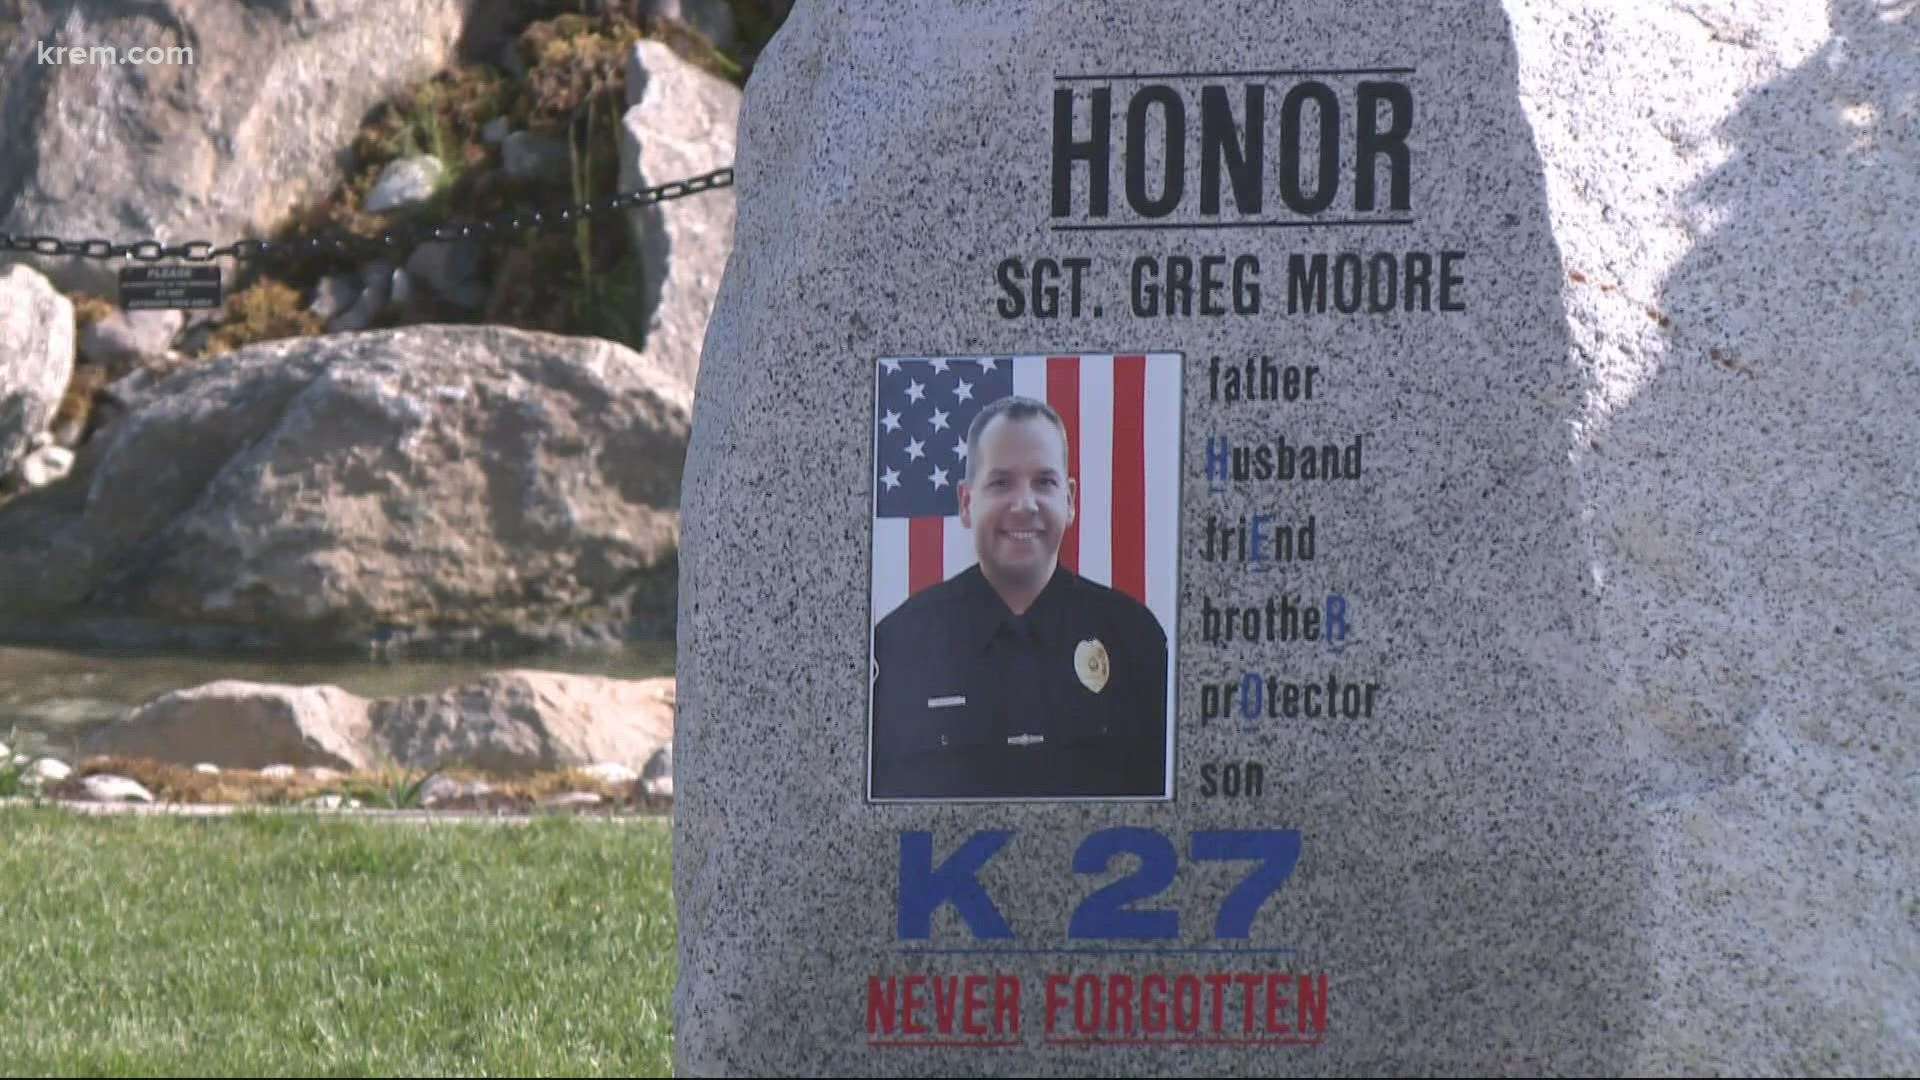 Coeur d'Alene Police Sgt. Greg Moore was on patrol in a neighborhood seven years ago when he was shot and killed by an armed suspect